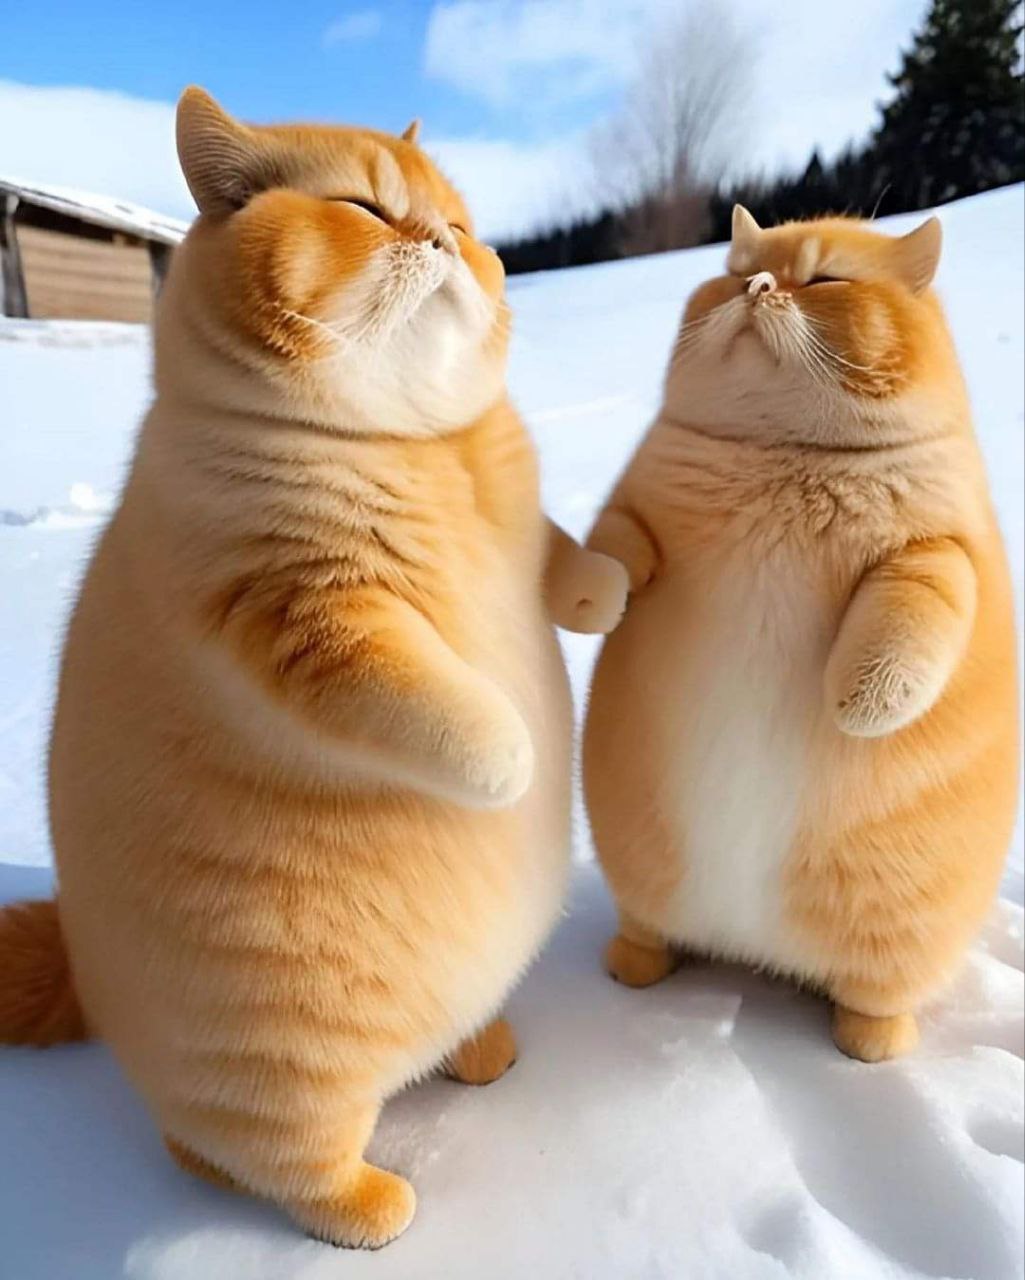 two cats sitting on a snow covered ground